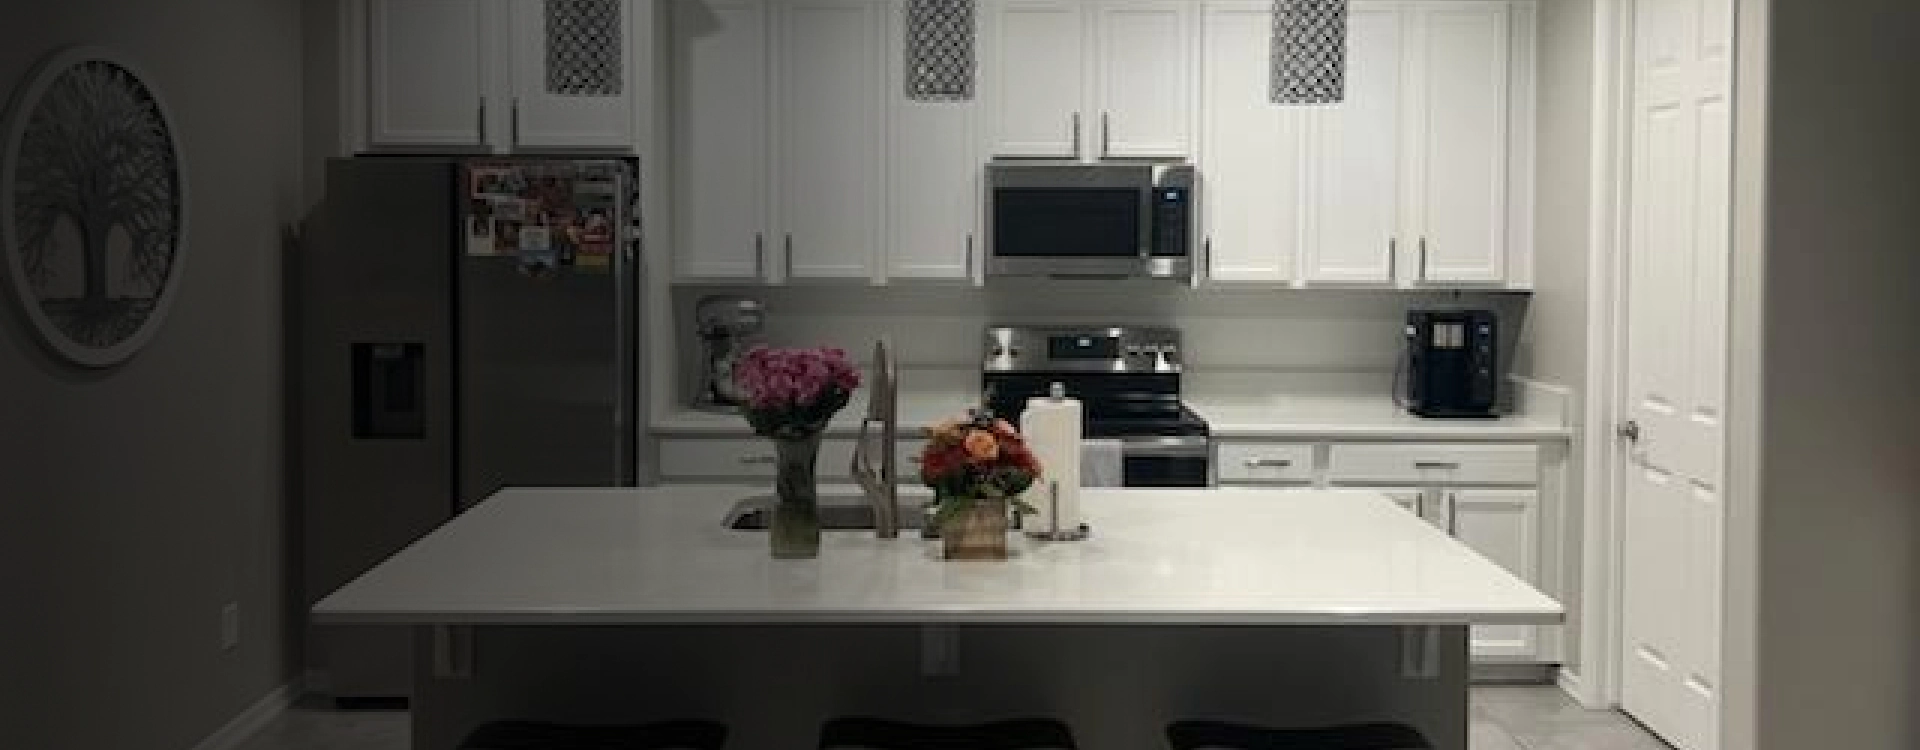 kitchen with flowers